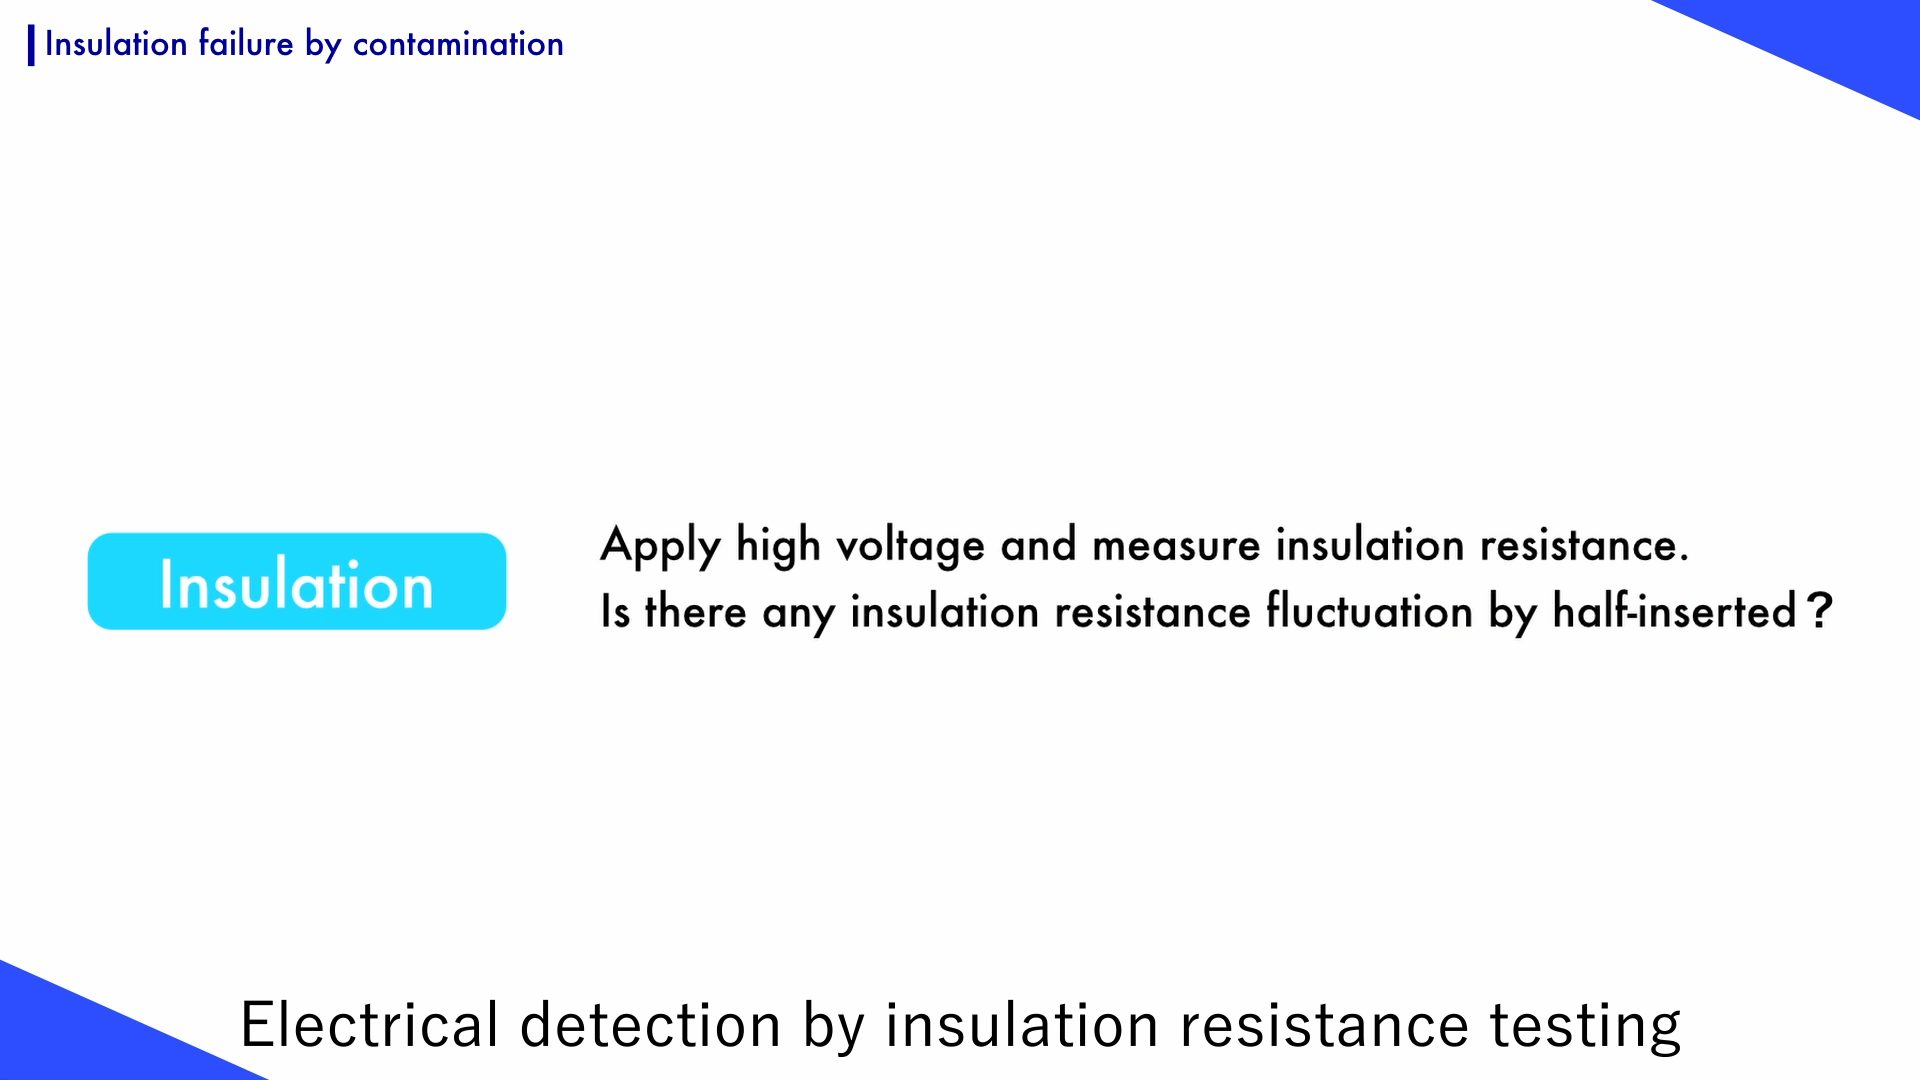 Electrical detection of contamination effects by insulation resistance testing